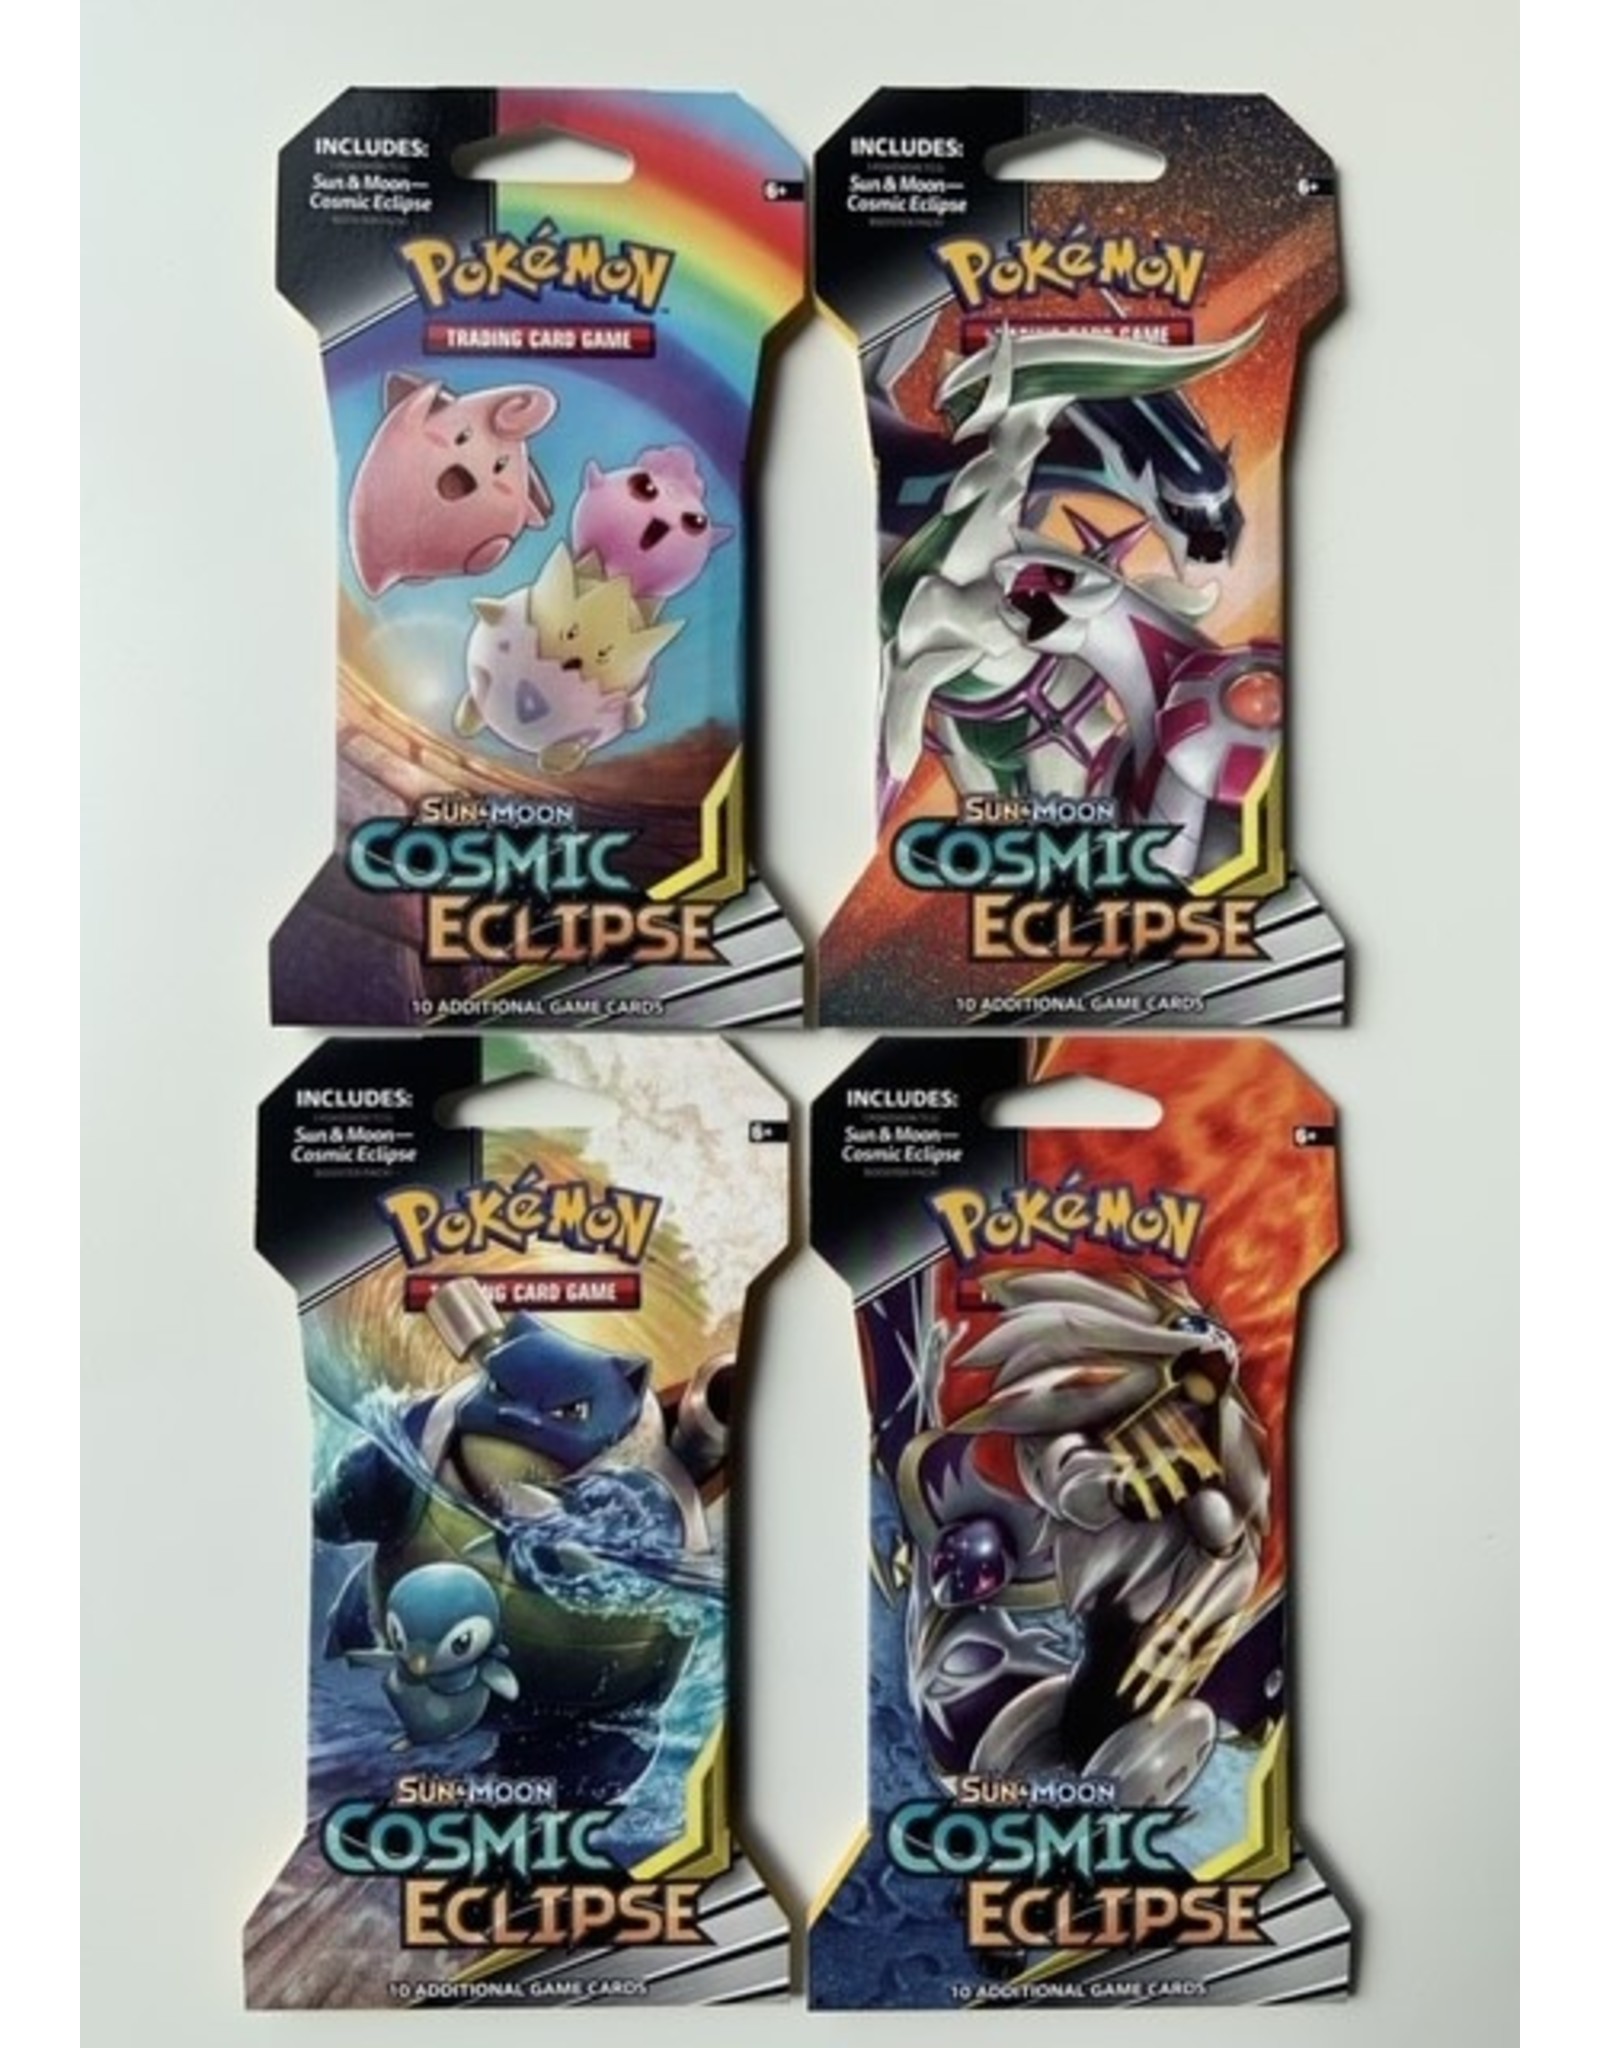 Sun & Moon Cosmic Eclipse sleeved booster